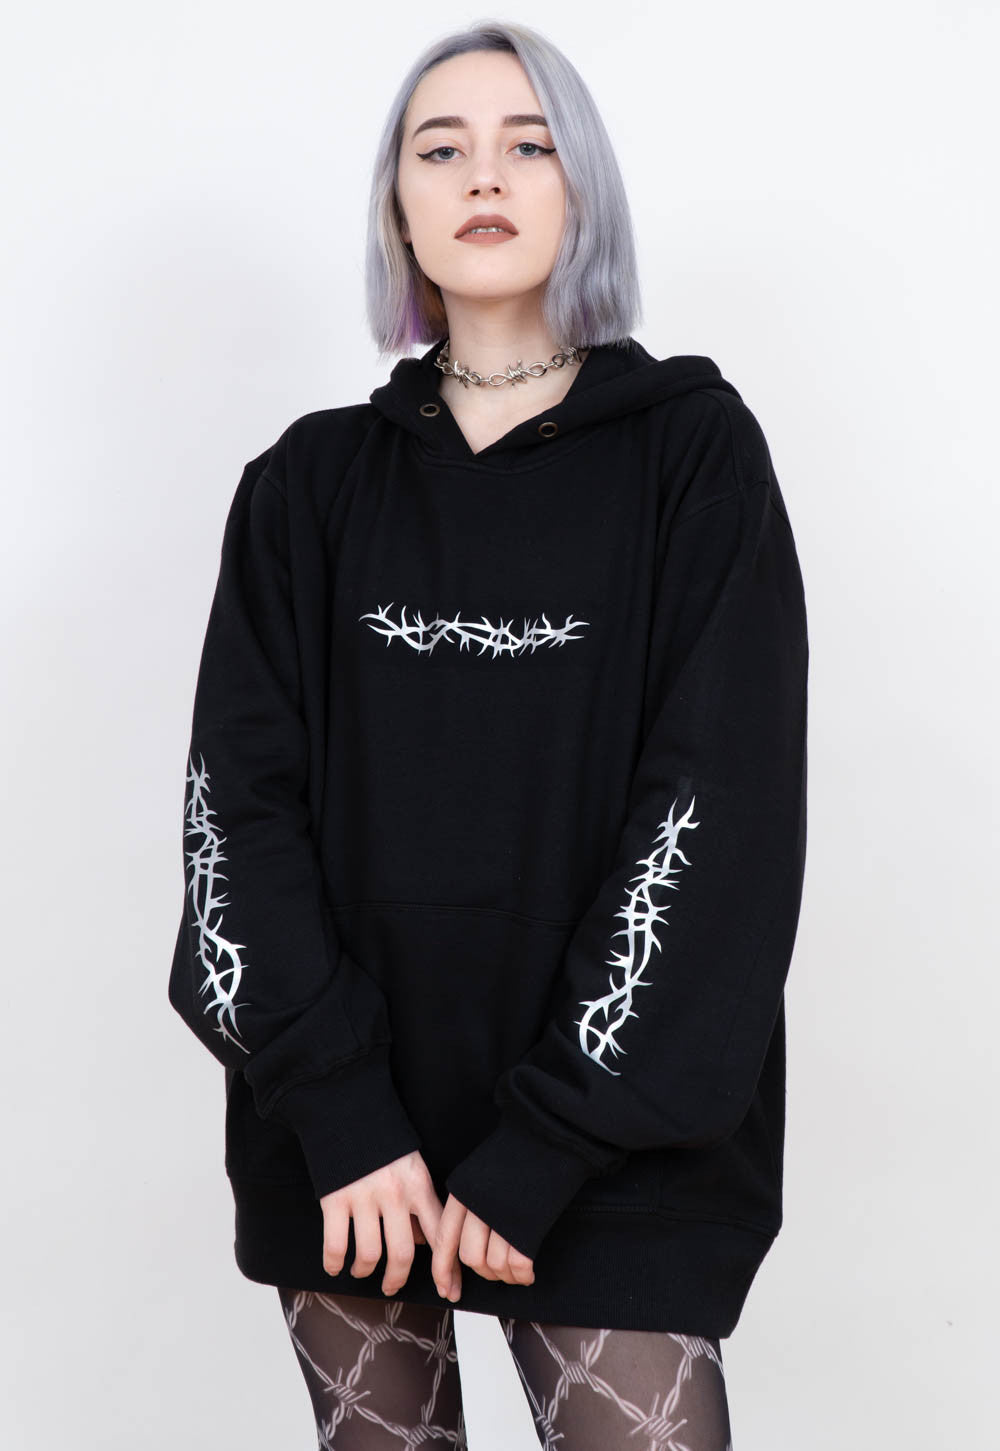 REFLECTIVE BARBED WIRE HOODIE